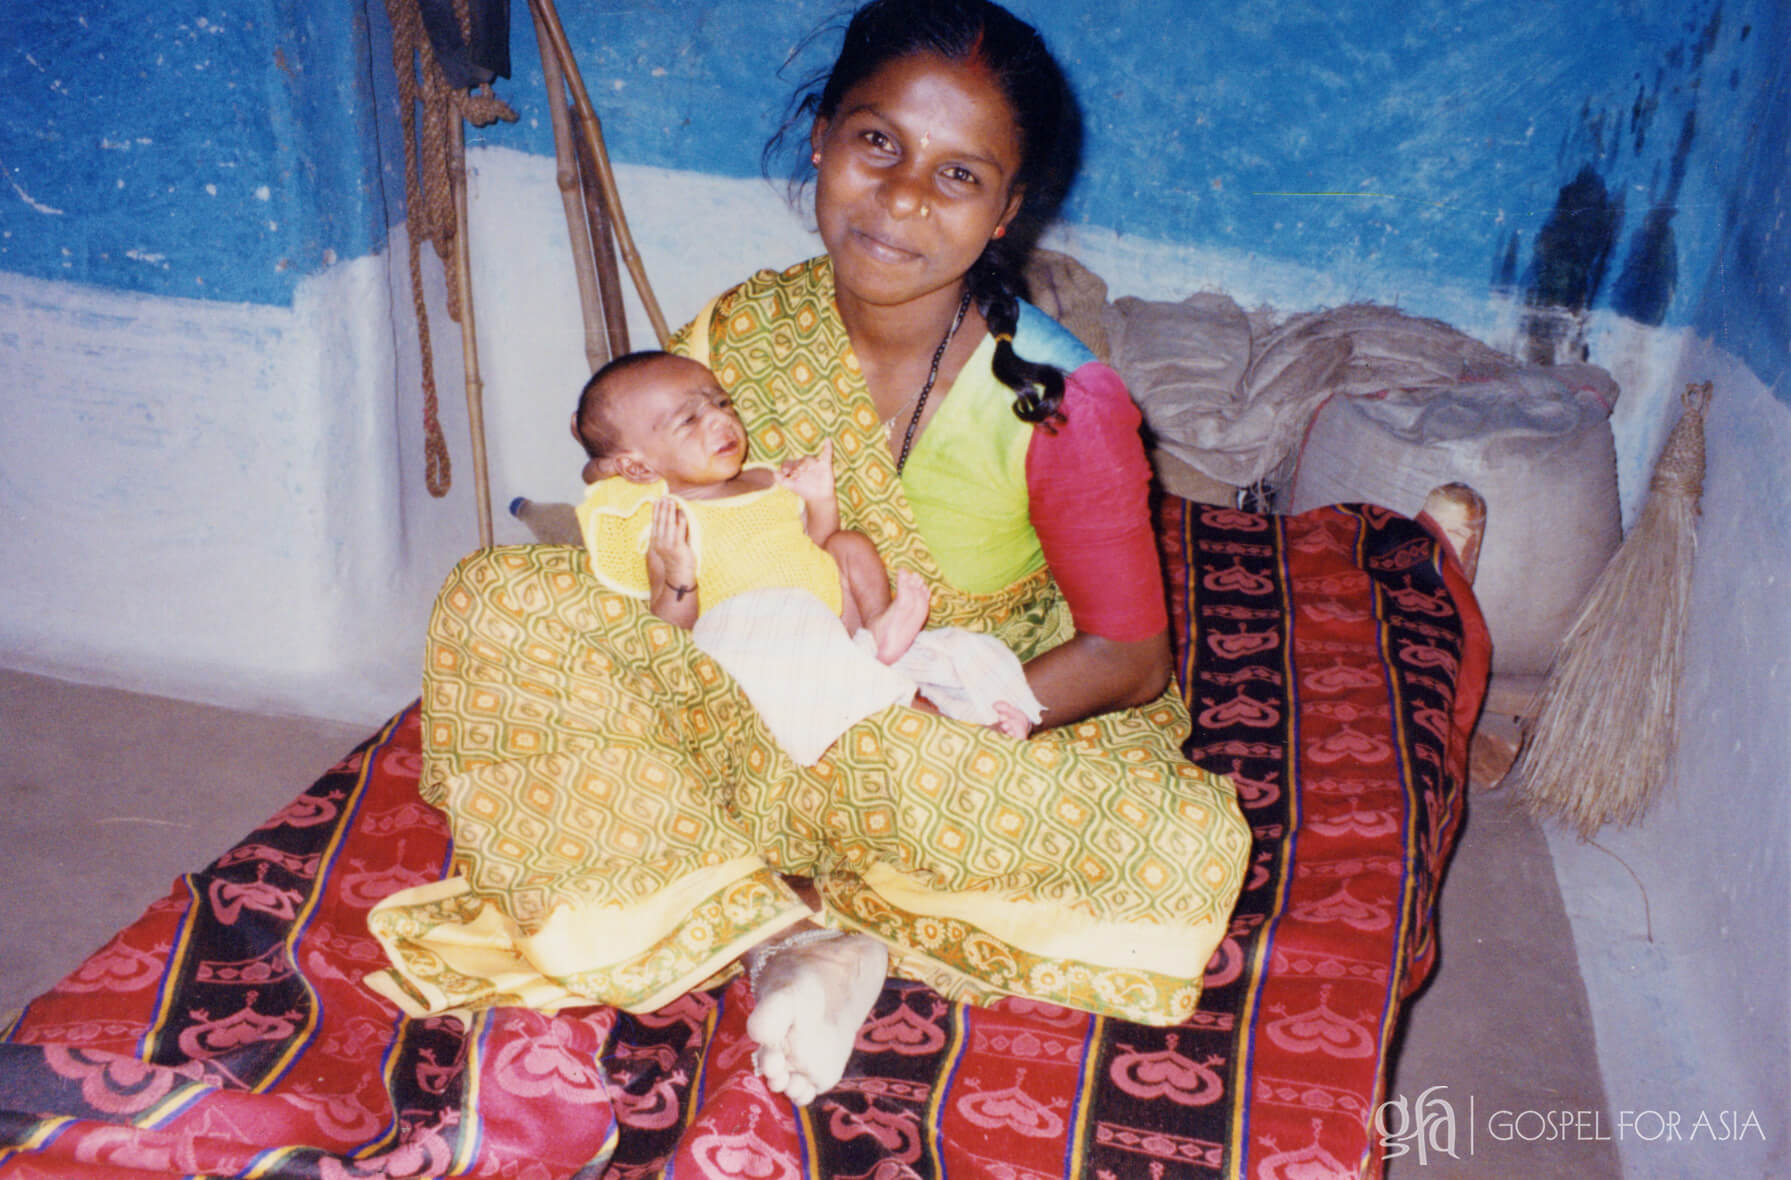 A young Indian woman happily poses with her newborn baby.